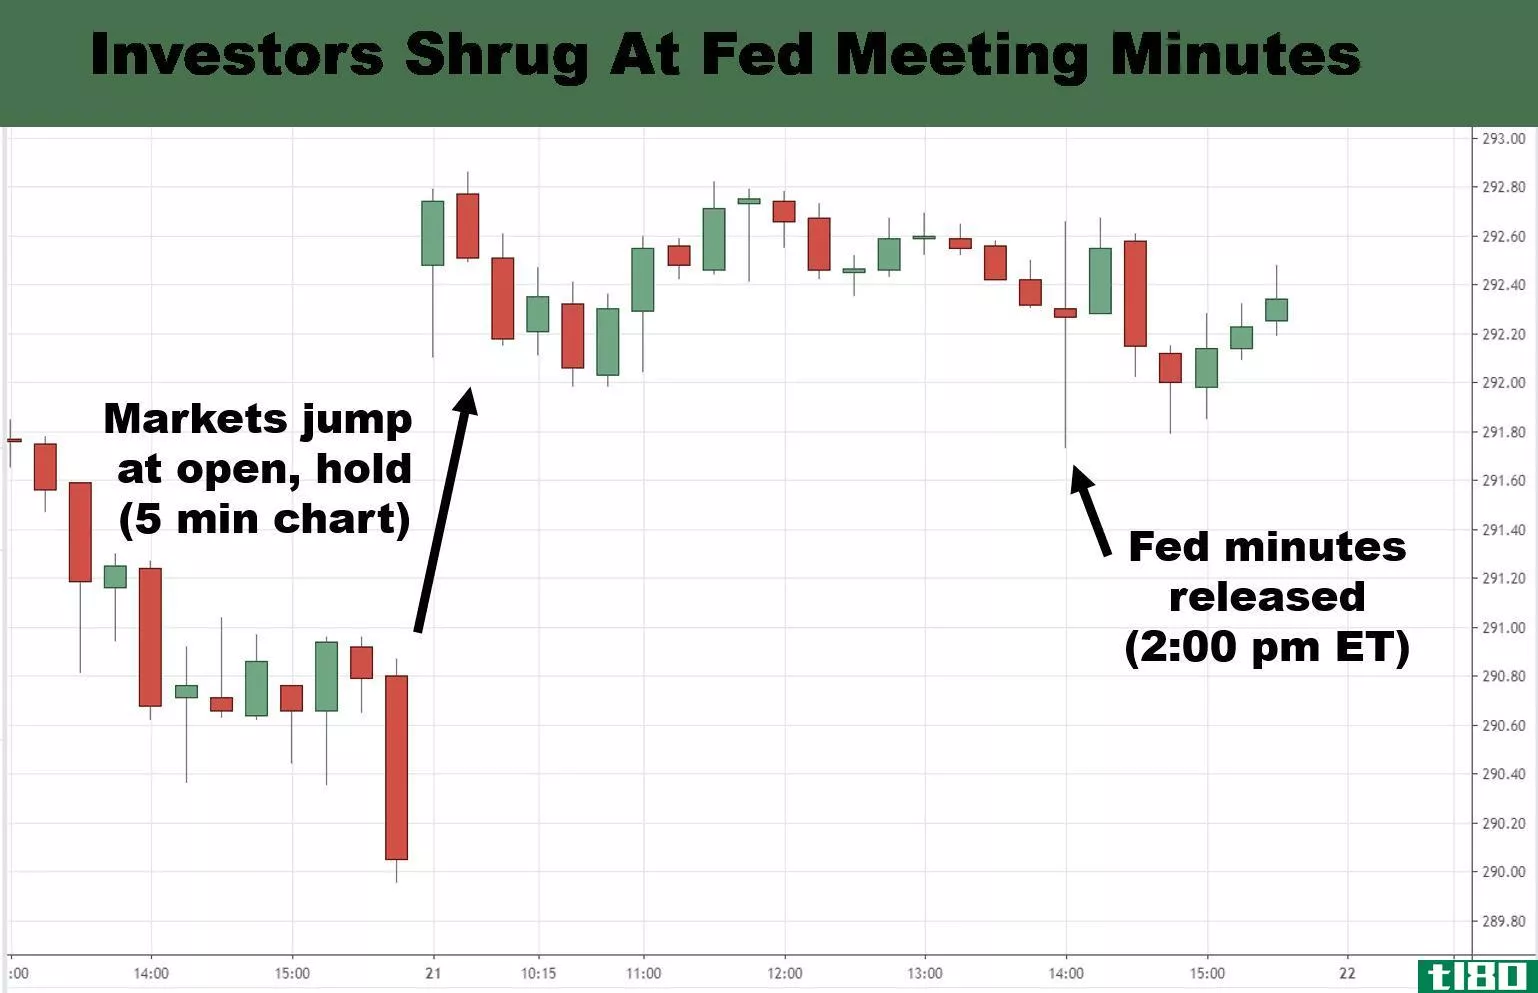 Chart showing the reaction of the S&P 500 index to the Fed meeting minutes